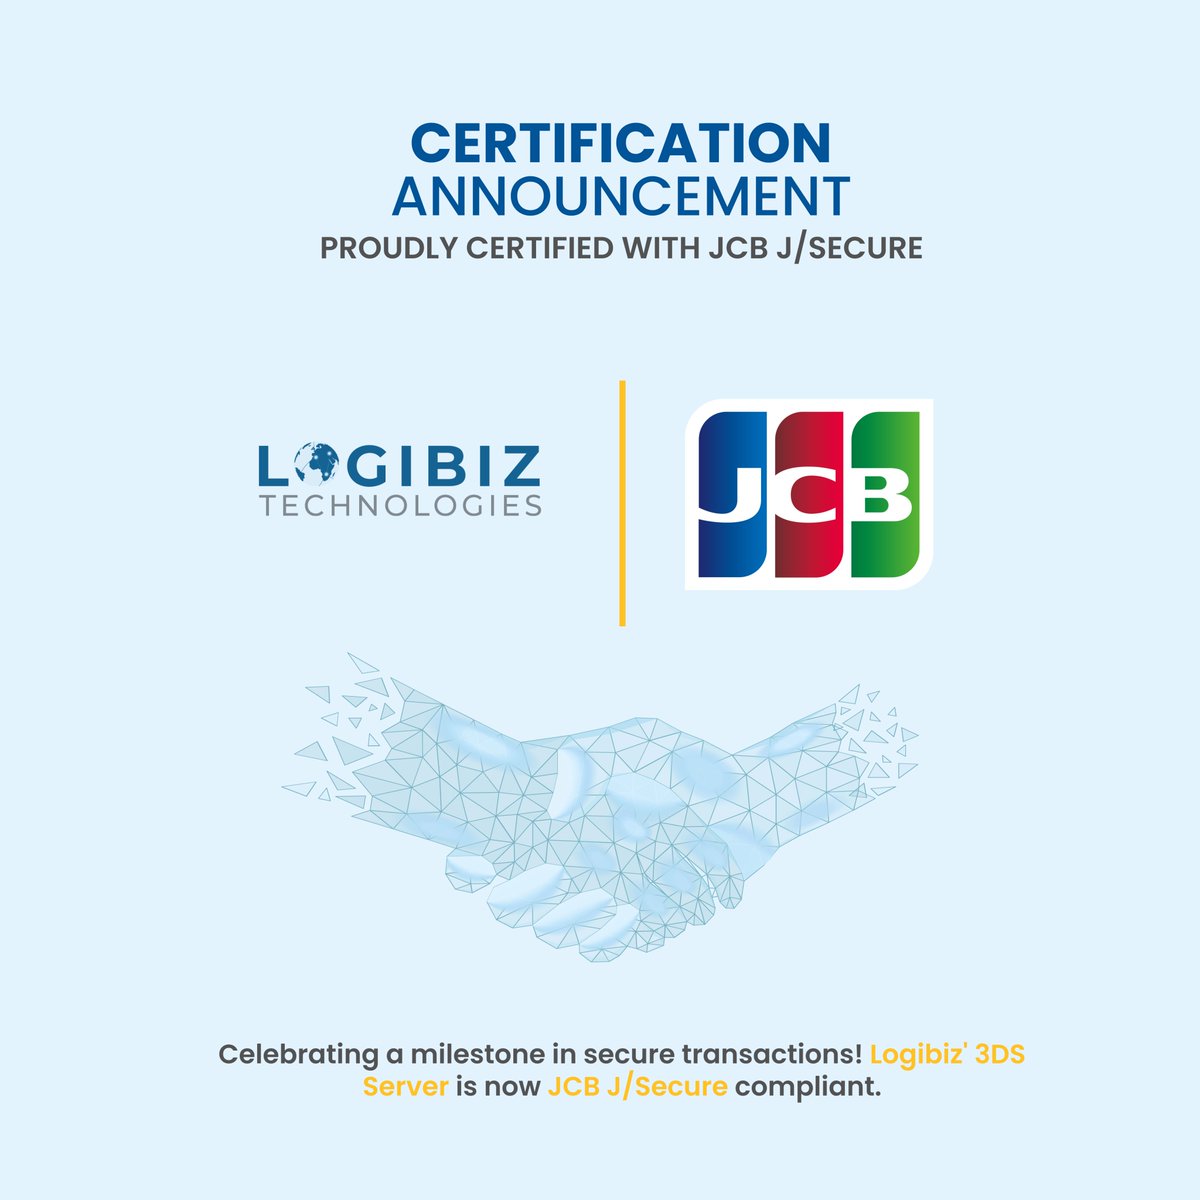 🚀 Exciting Update from Logibiz Technologies! 🚀 We're thrilled to announce that the 3DS Server (Paybiz3DS) is now officially certified with JCB J/Secure. Contact us: 👉 sales@logibiztech.com #EMVCo #3DSecure #DigitalPayments #JCB #JSecure #securepayment